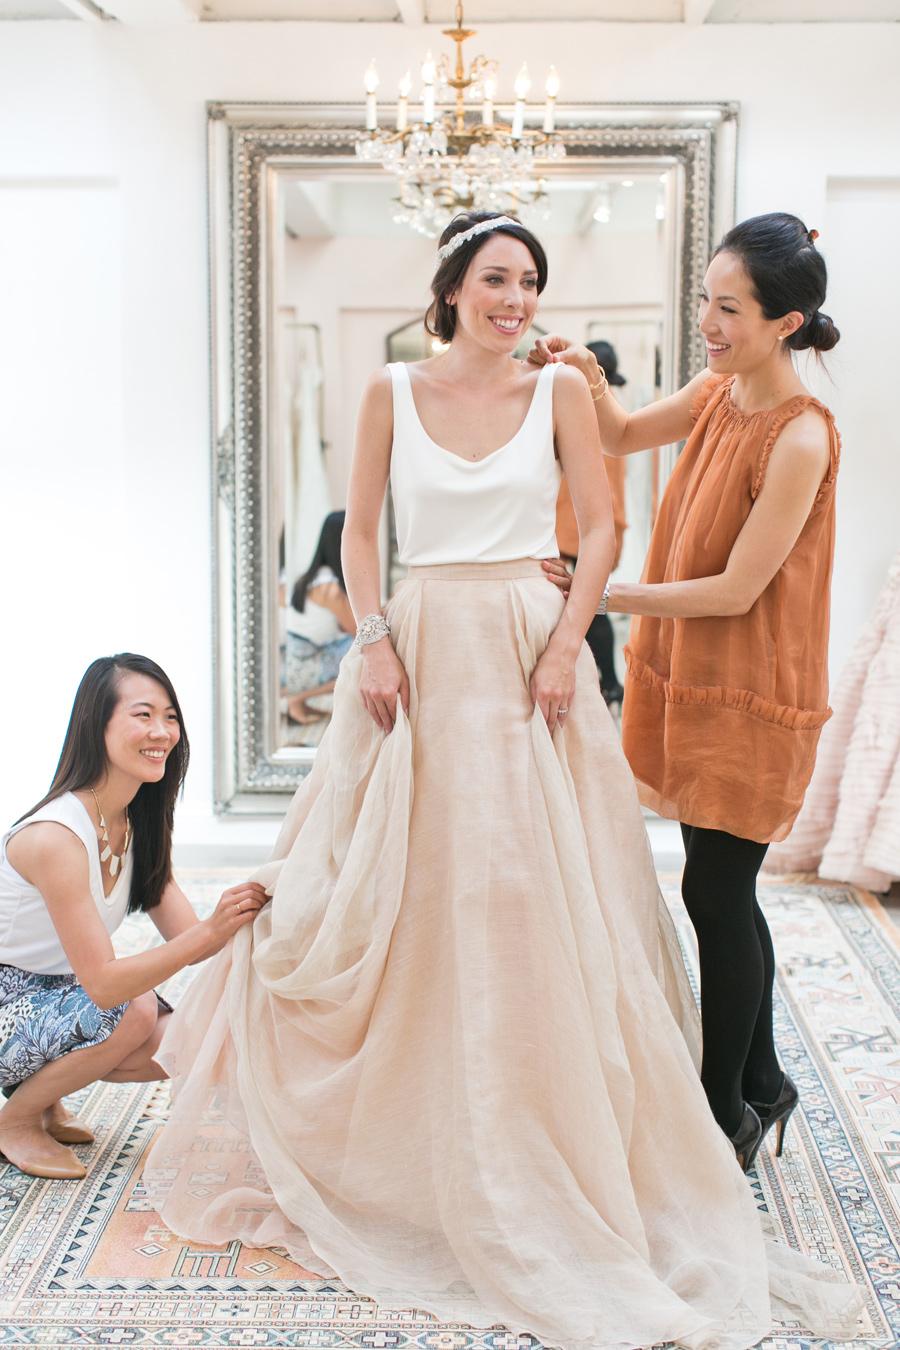 8 Tips For Finding the Perfect Wedding Dress